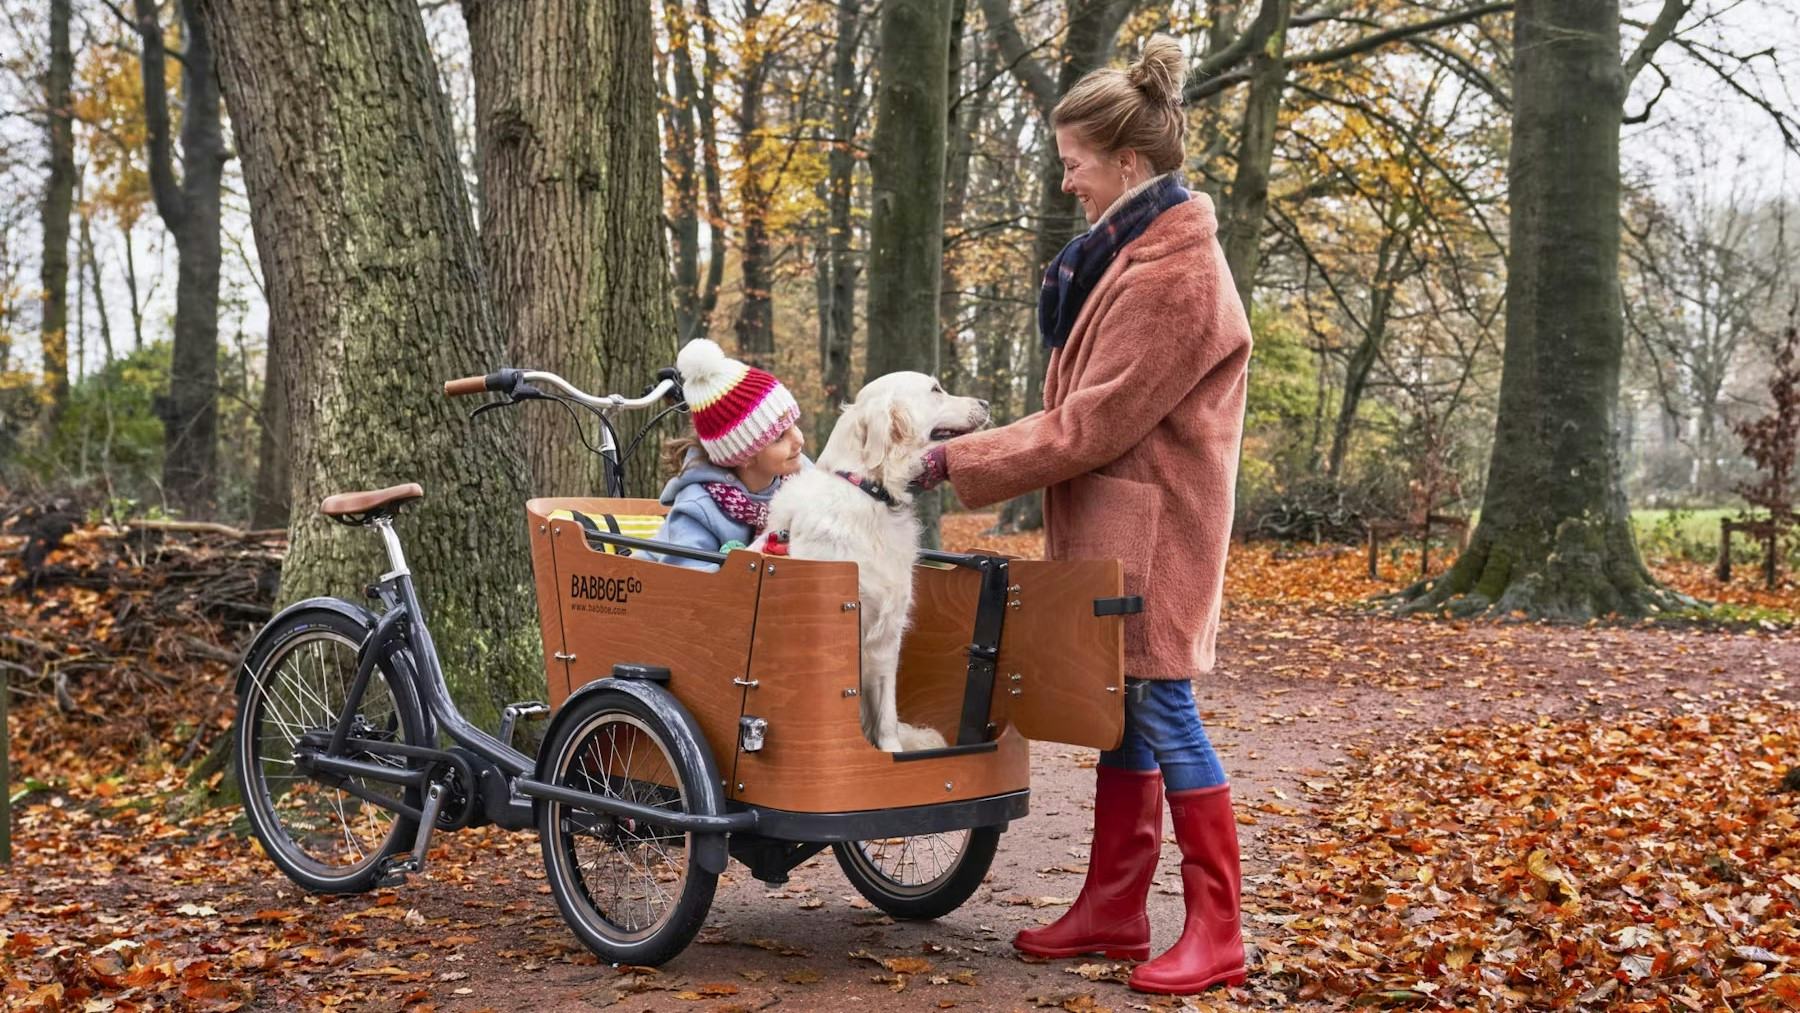 Babboe has entered the final phase of research into the safety of its cargo bikes. – Photo Babboe